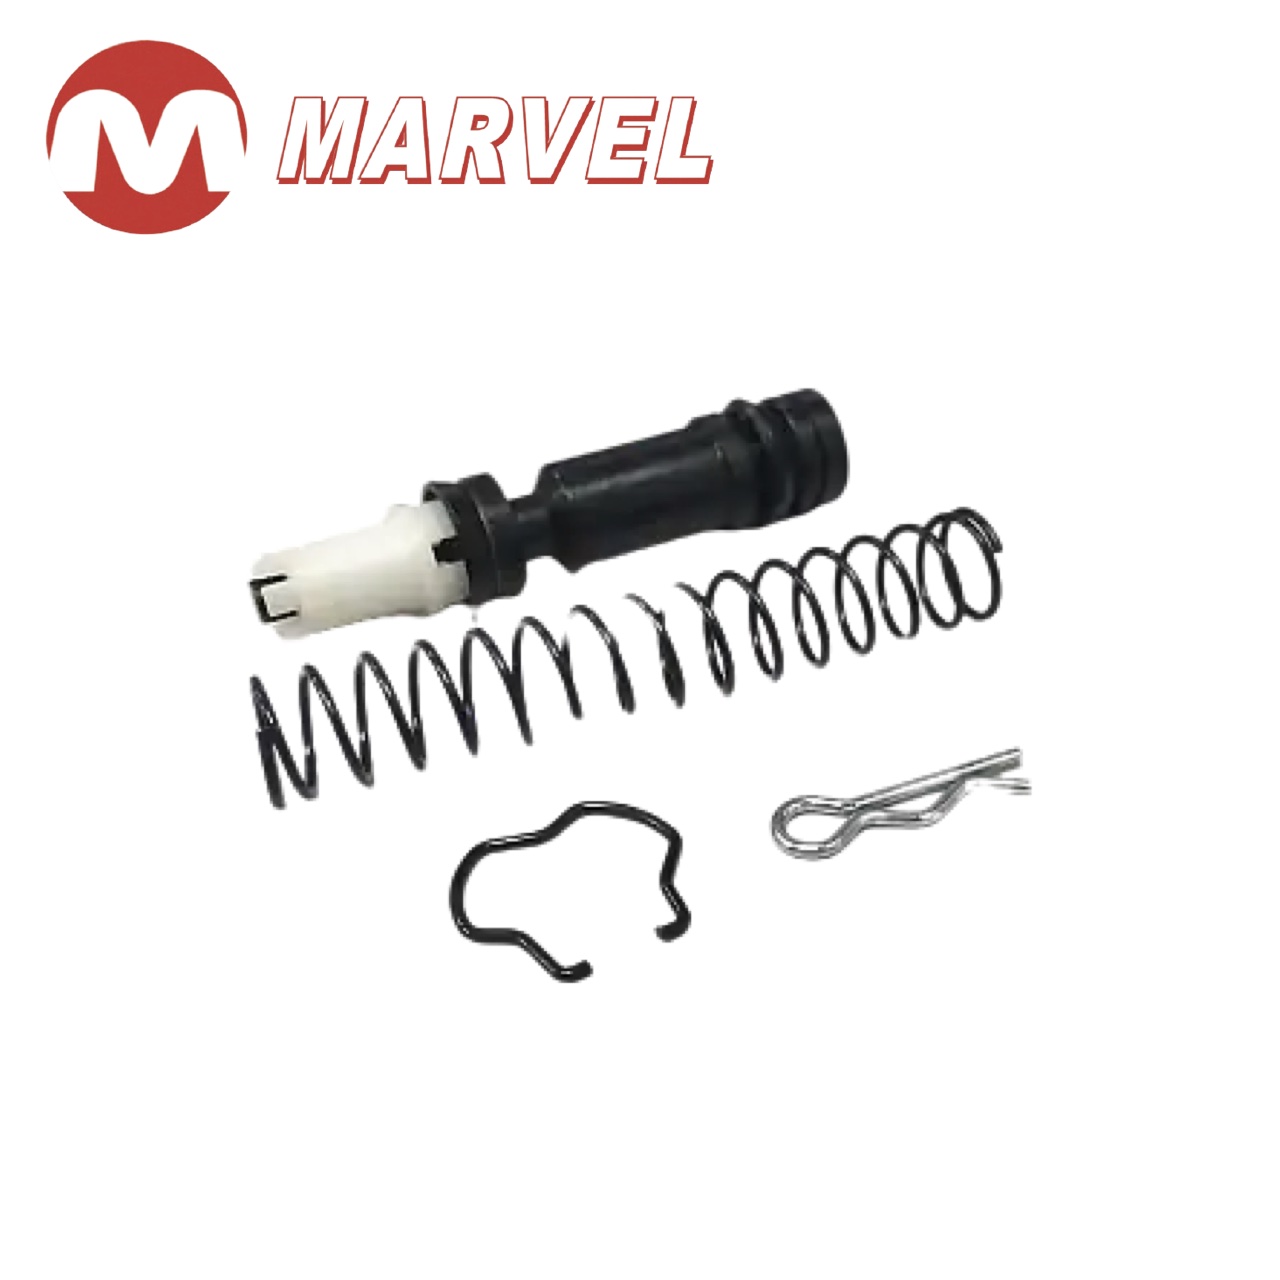 Toyota Clutch Master Cylinder Repair Kit | Taiwantrade